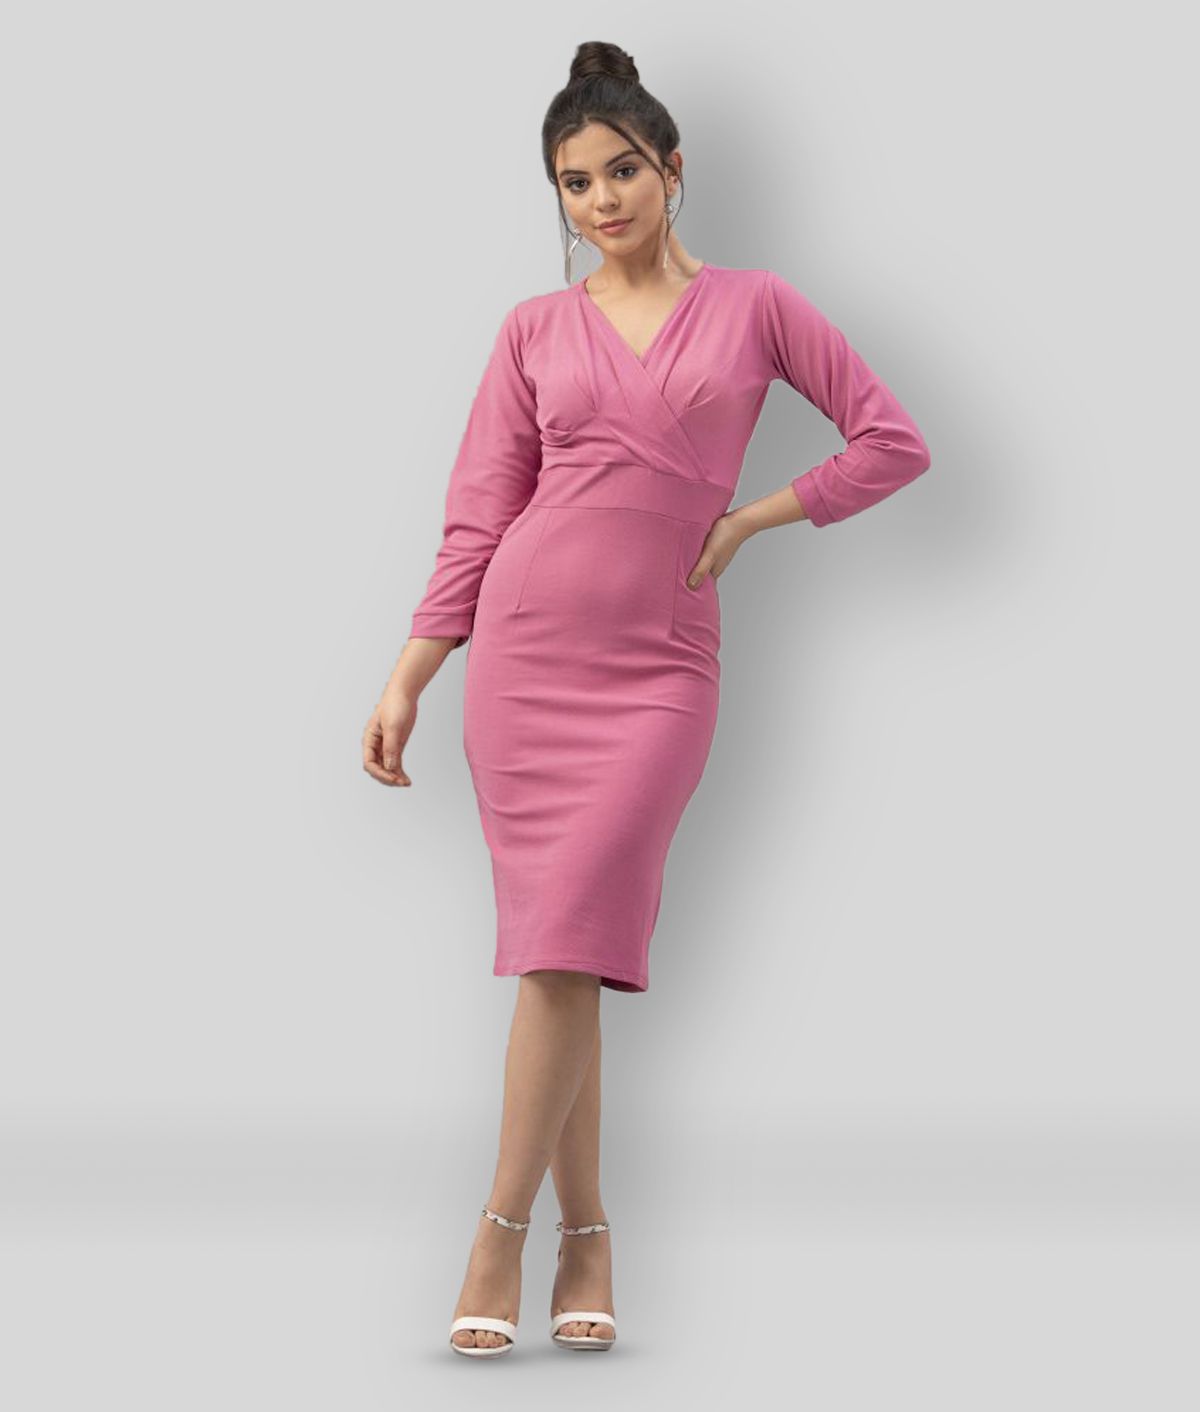     			Selvia - Pink Cotton Blend Women's Bodycon Dress ( Pack of 1 )